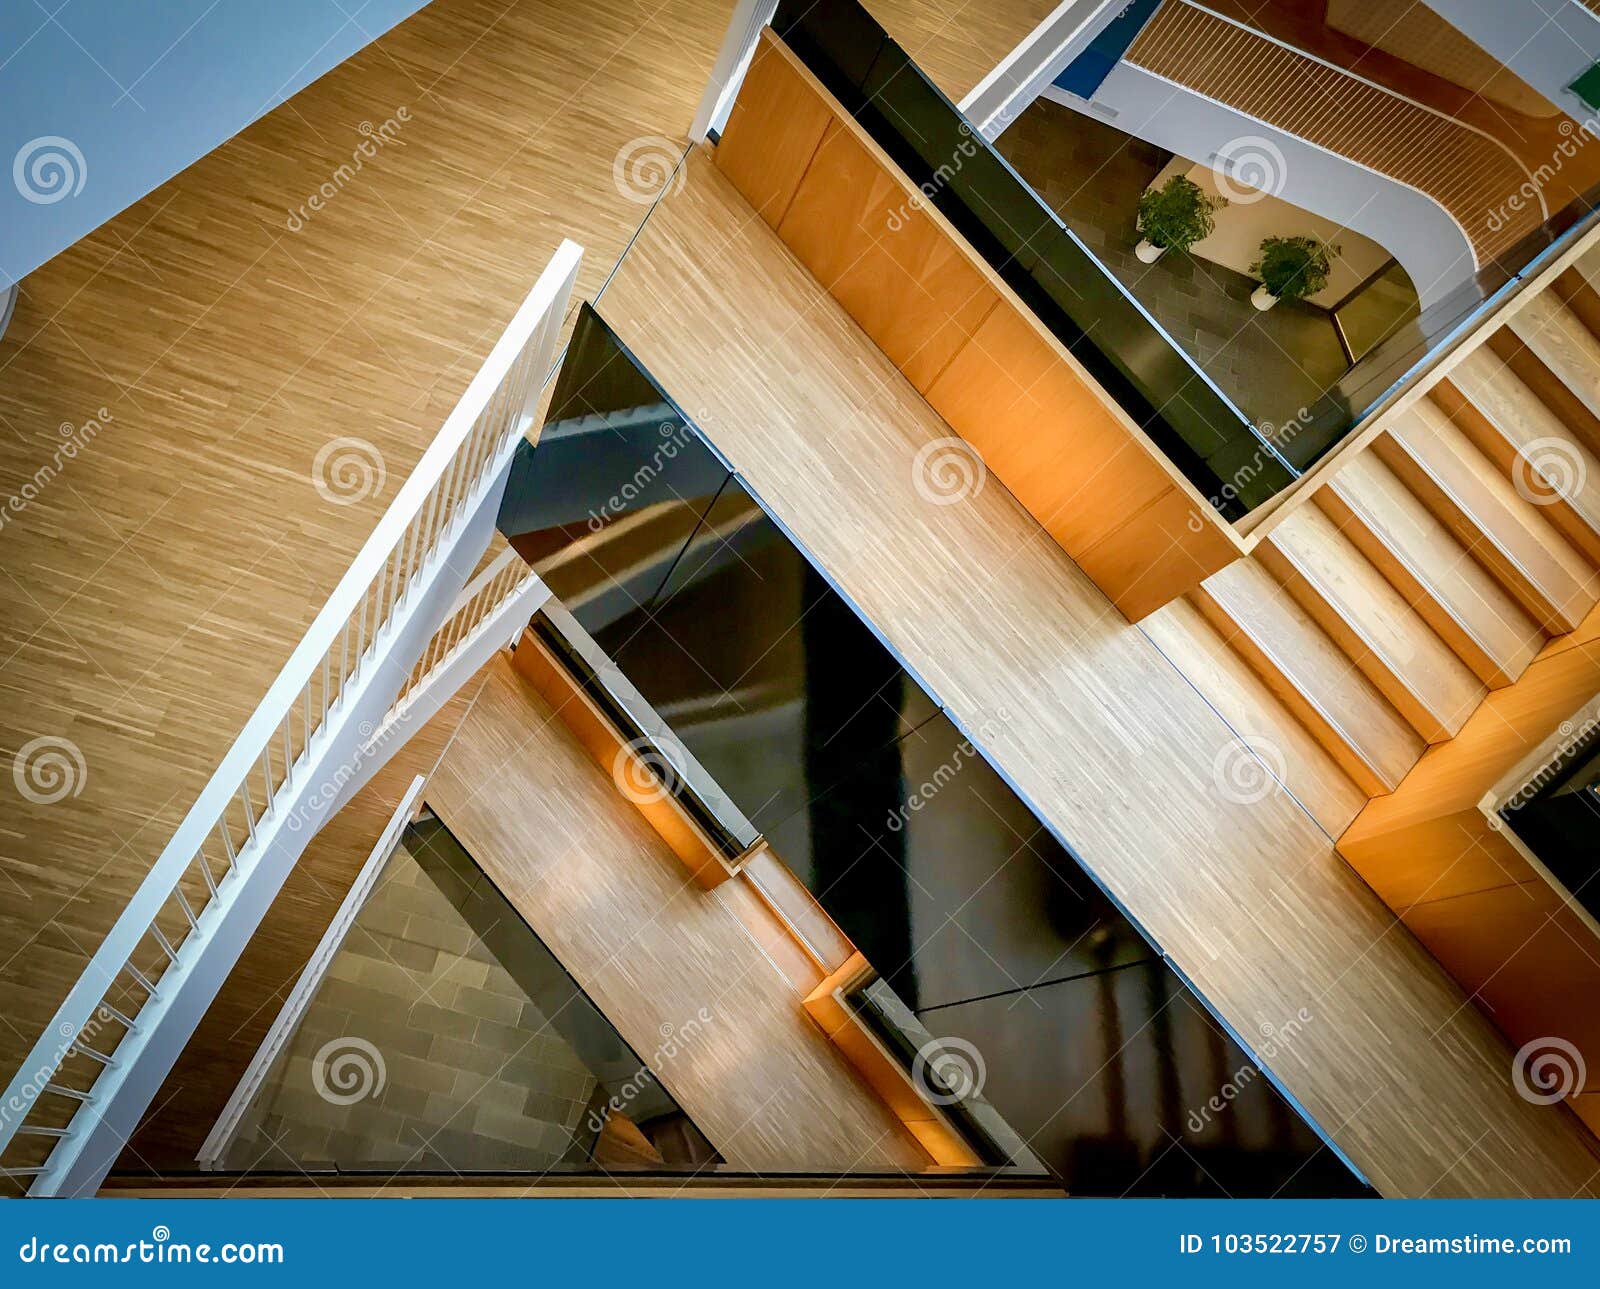 Wooden Floors Mixed With A Beautiful Staircase Stock Image Image